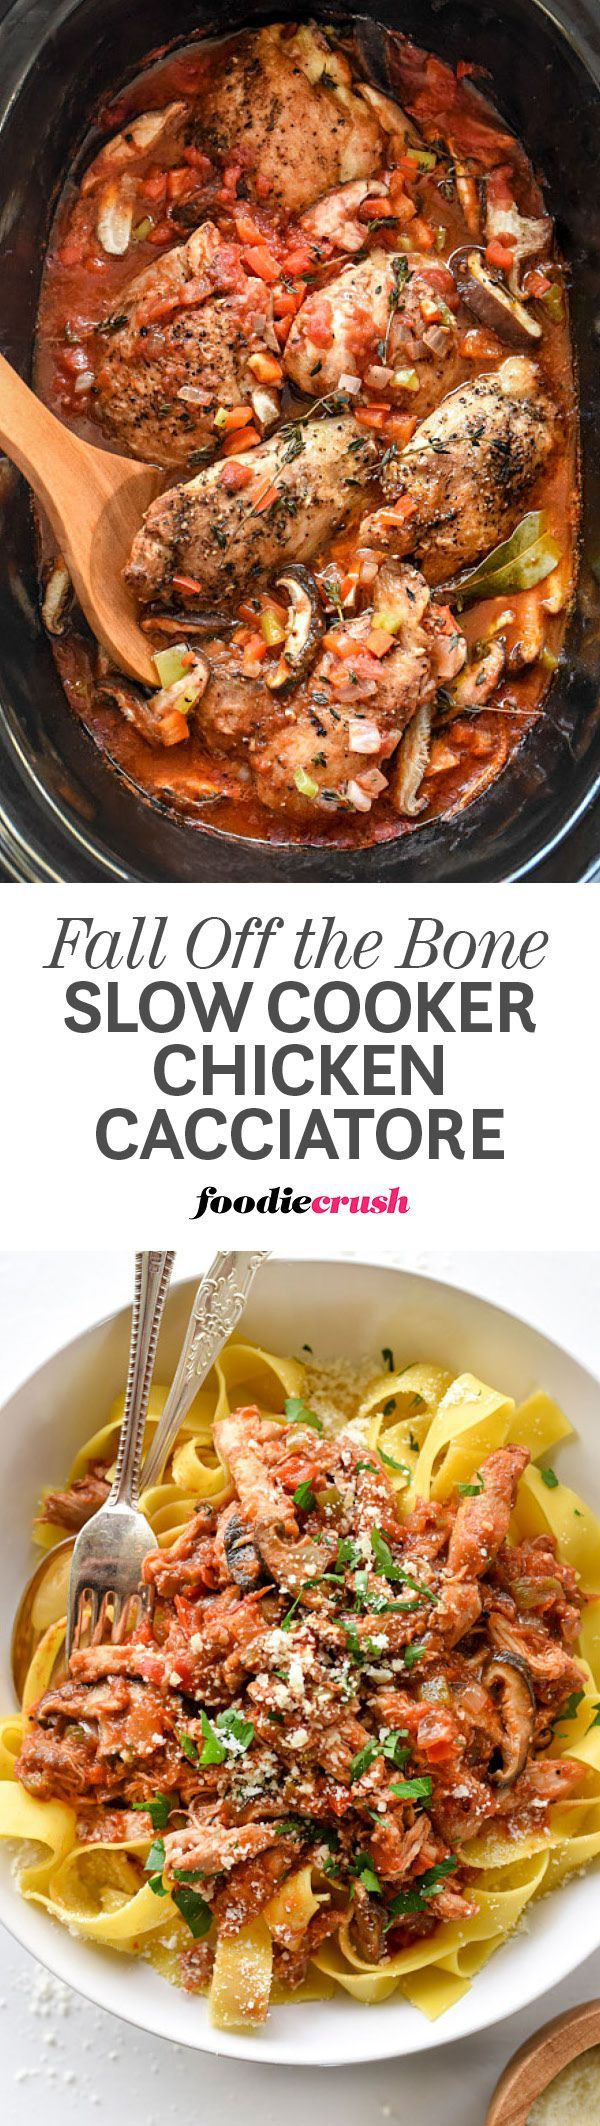 Pressure Cooker Chicken Thighs Paleo
 Slow cooked bone in skinless chicken thighs create the